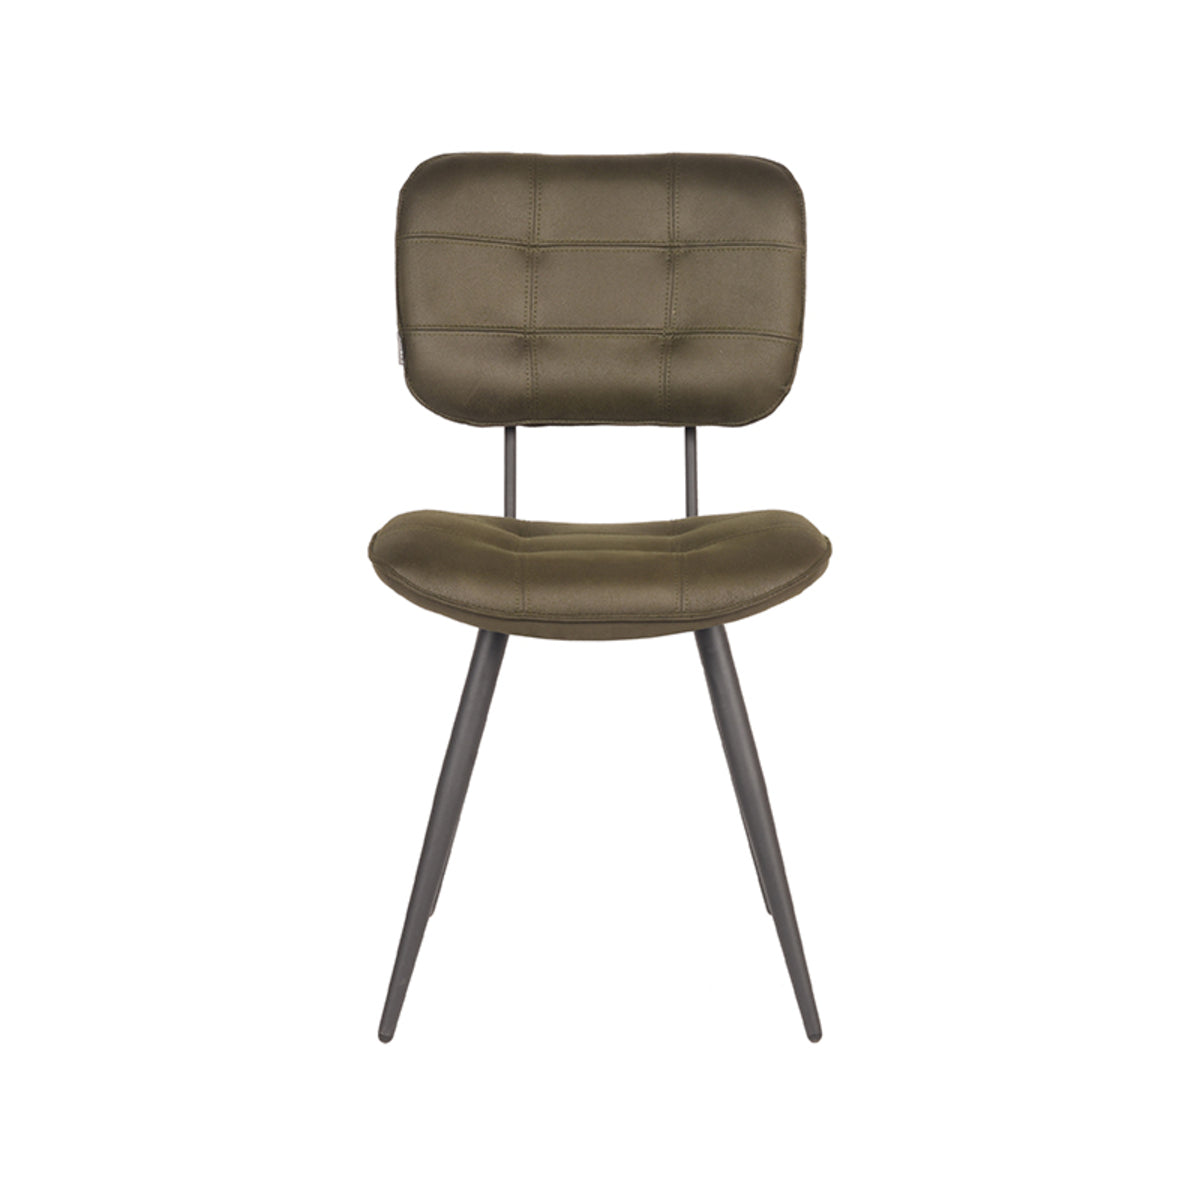 LABEL51 Dining room chair Gus - Army green - Microfiber | 2 pieces